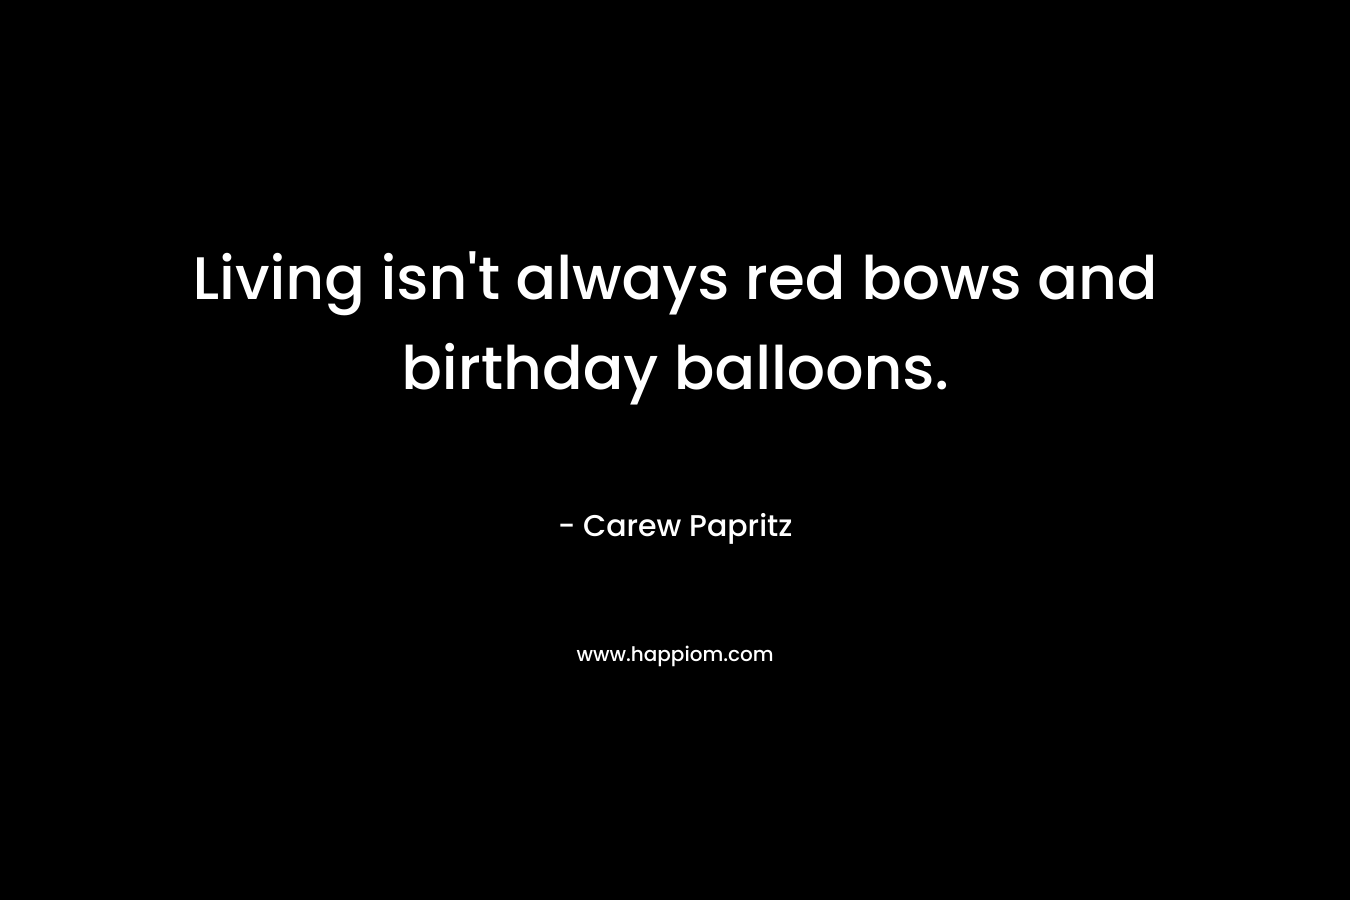 Living isn’t always red bows and birthday balloons. – Carew Papritz